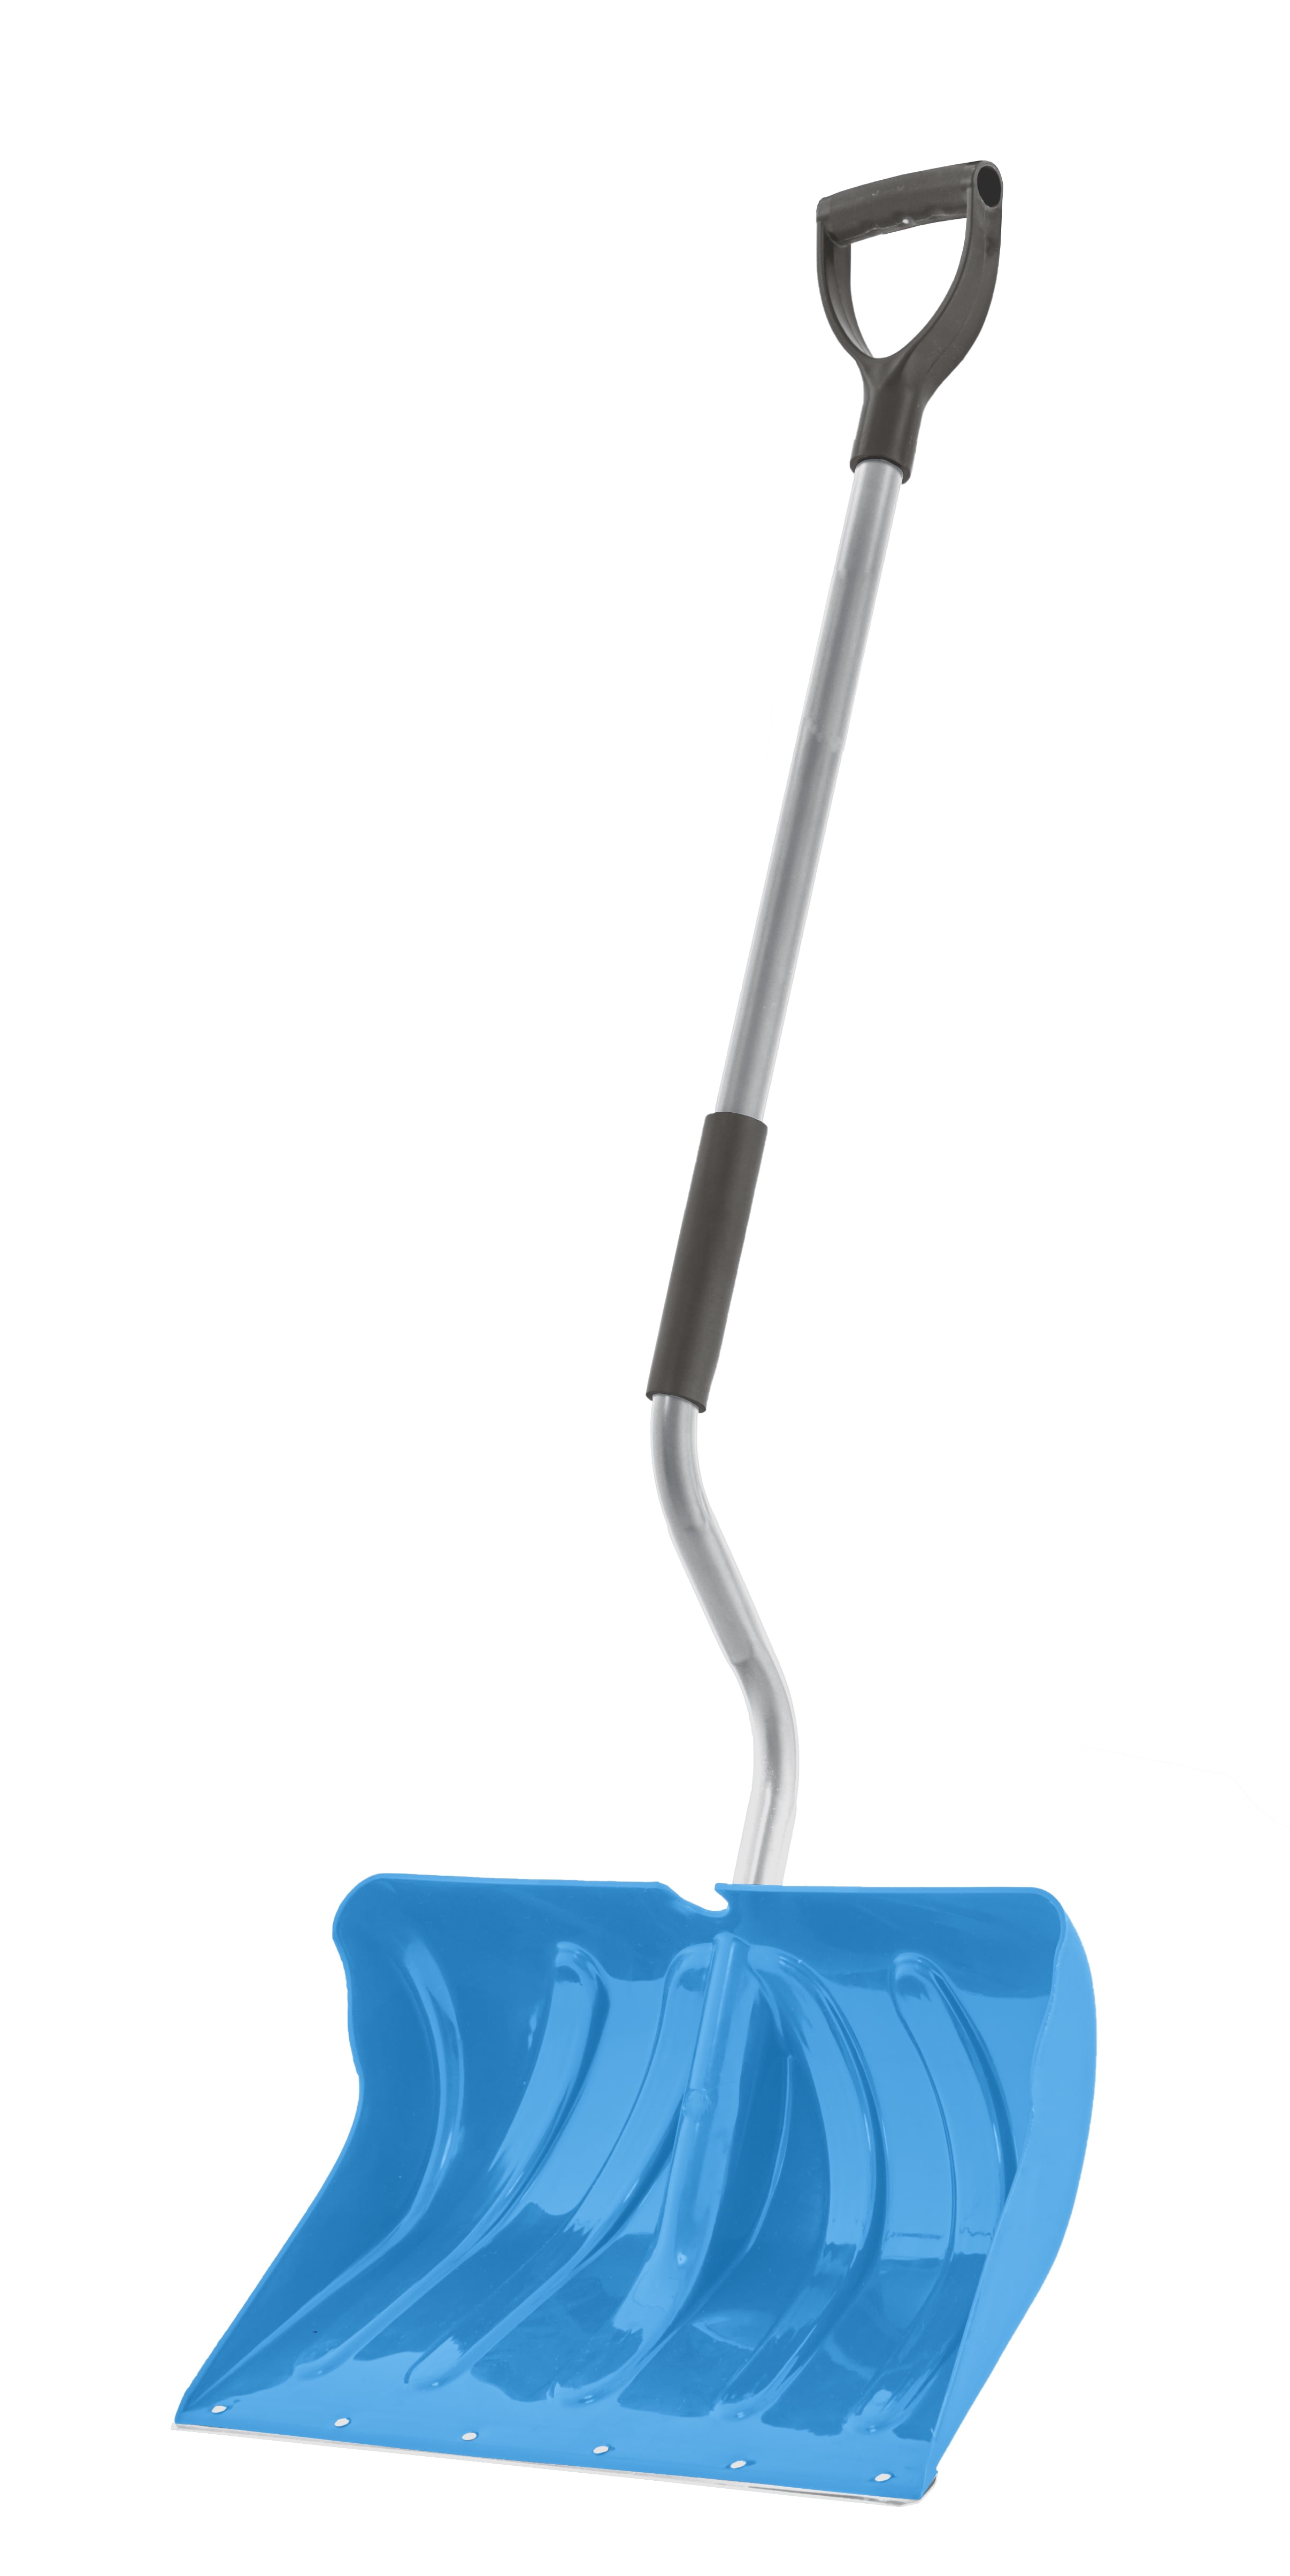 Superio 18 Snow Shovel for Driveway with Sturdy D-Grip Metal Handle and Foam Grip Heavy Duty, 